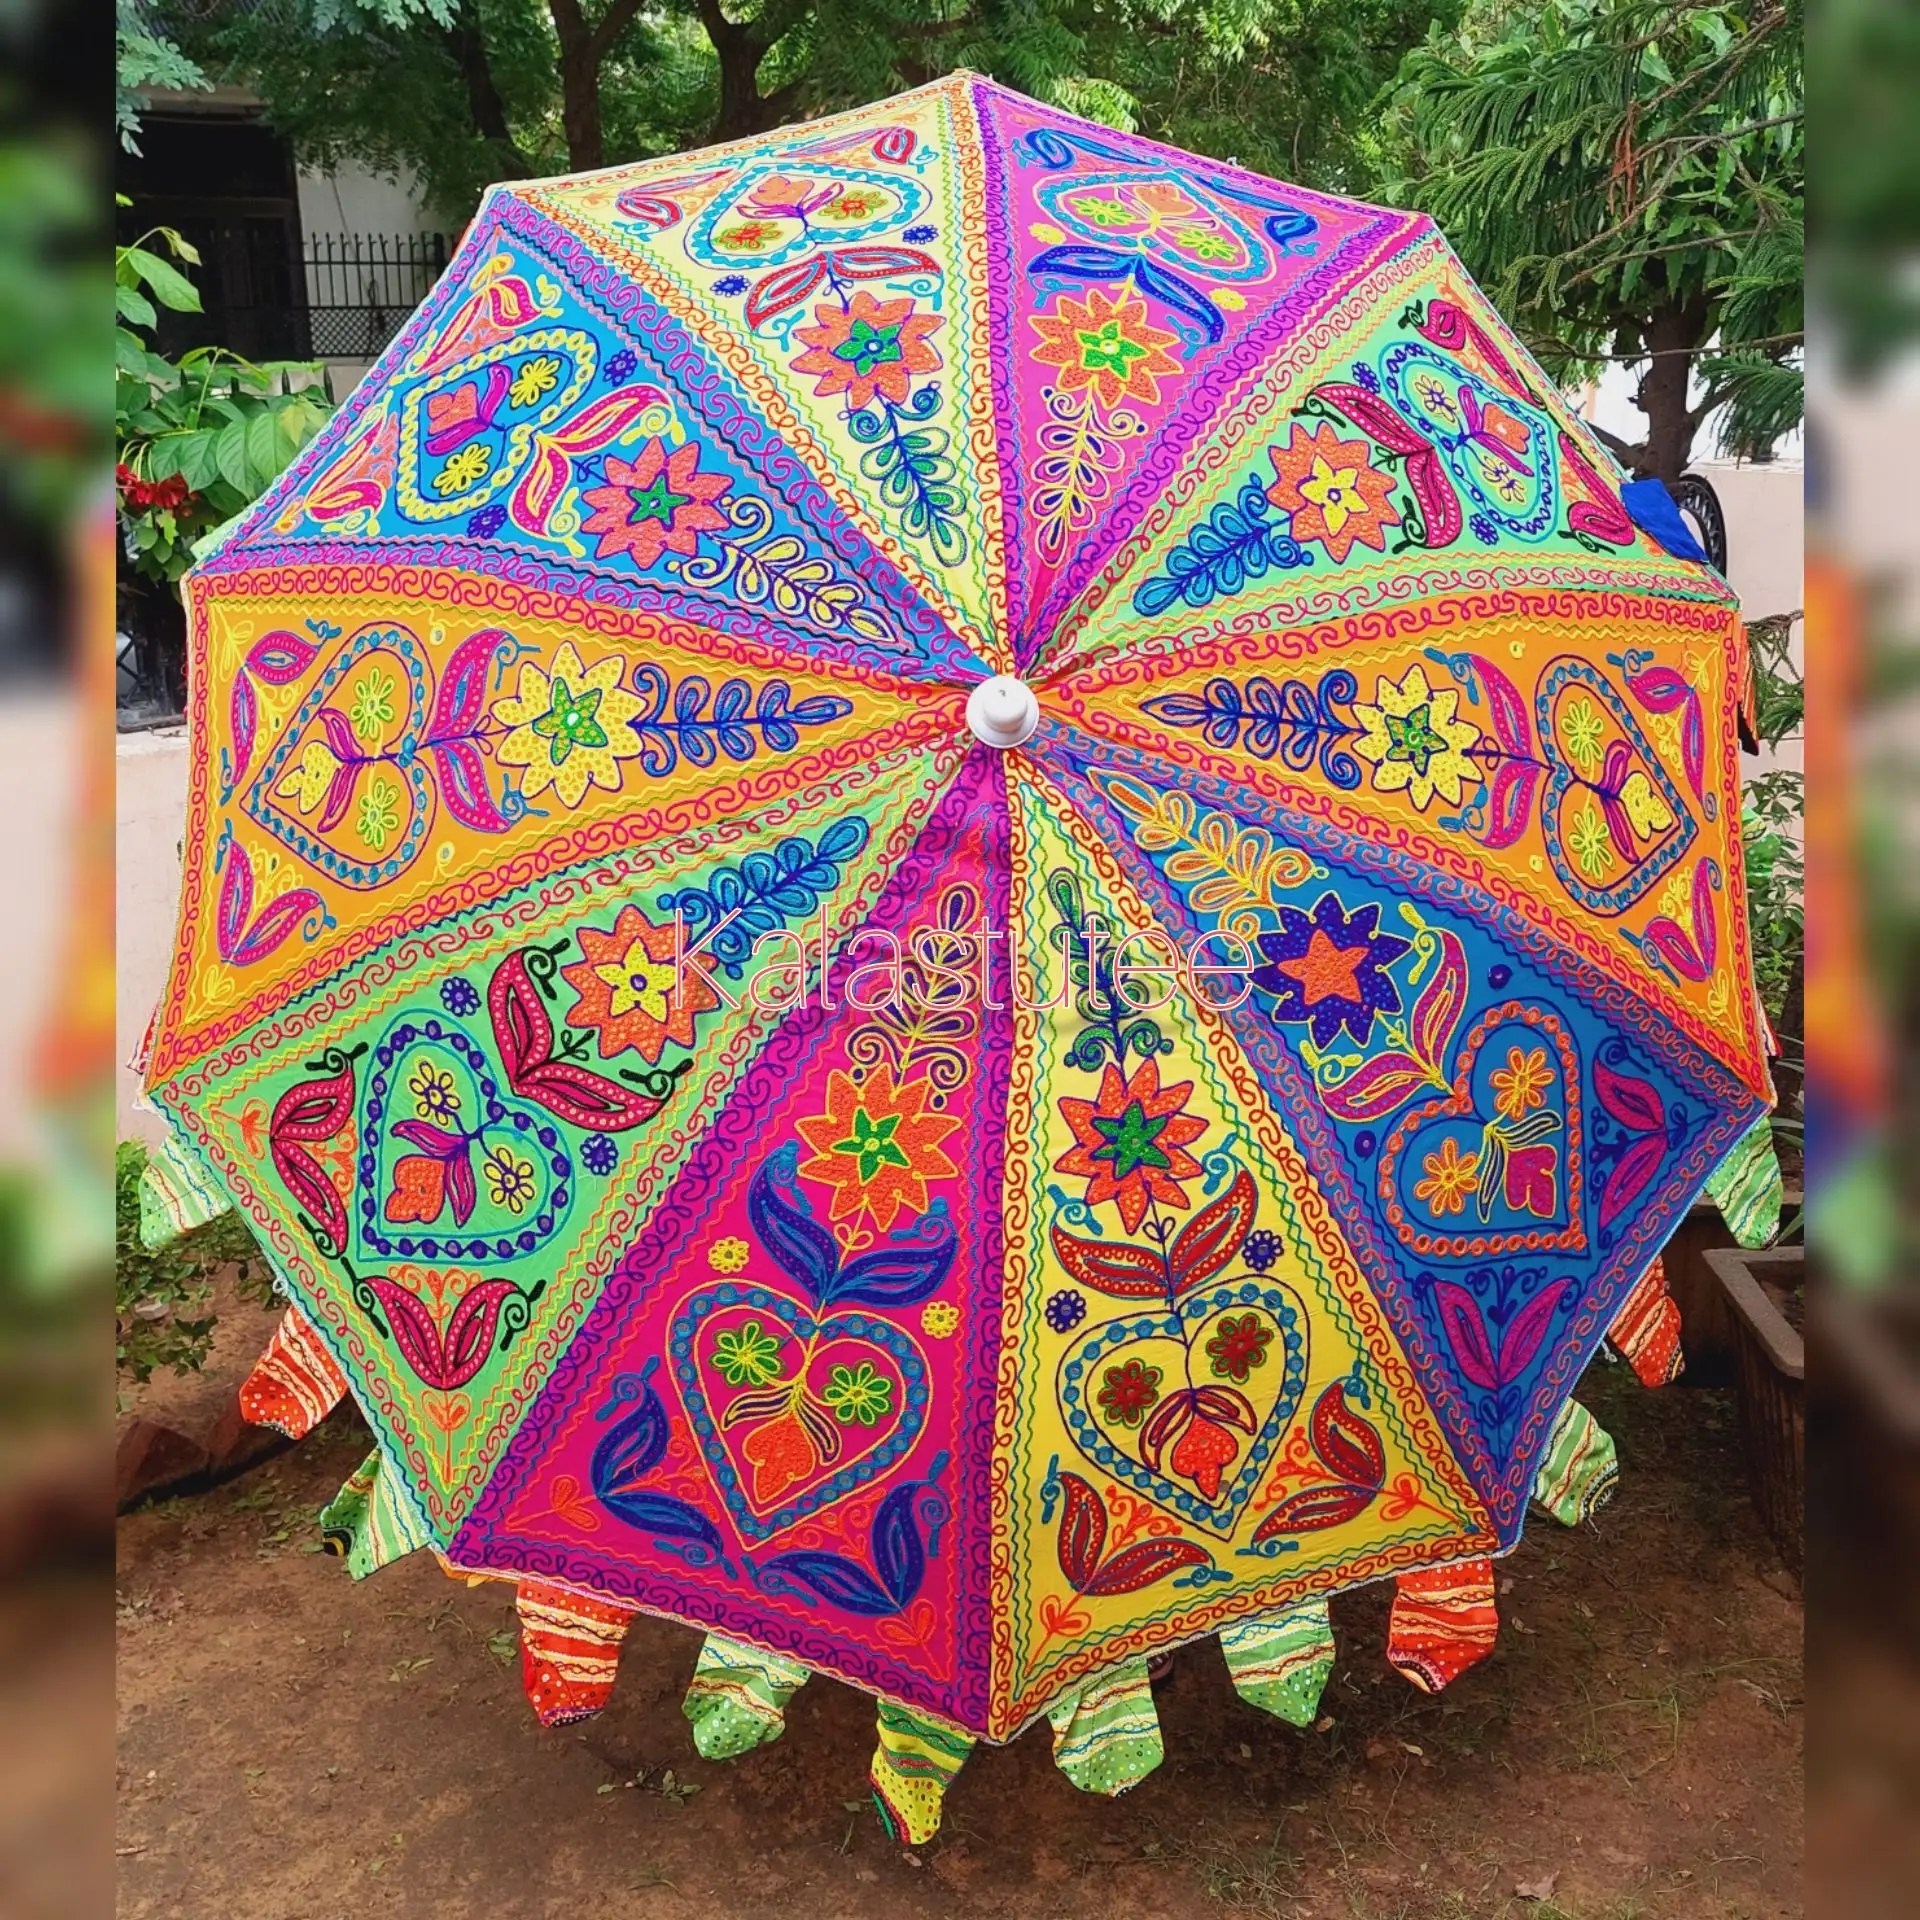 Handmade Rajasthani Print Embroidered Design Decorative Umbrella in Multi Color Ideal for Wedding Function Party Event Decor